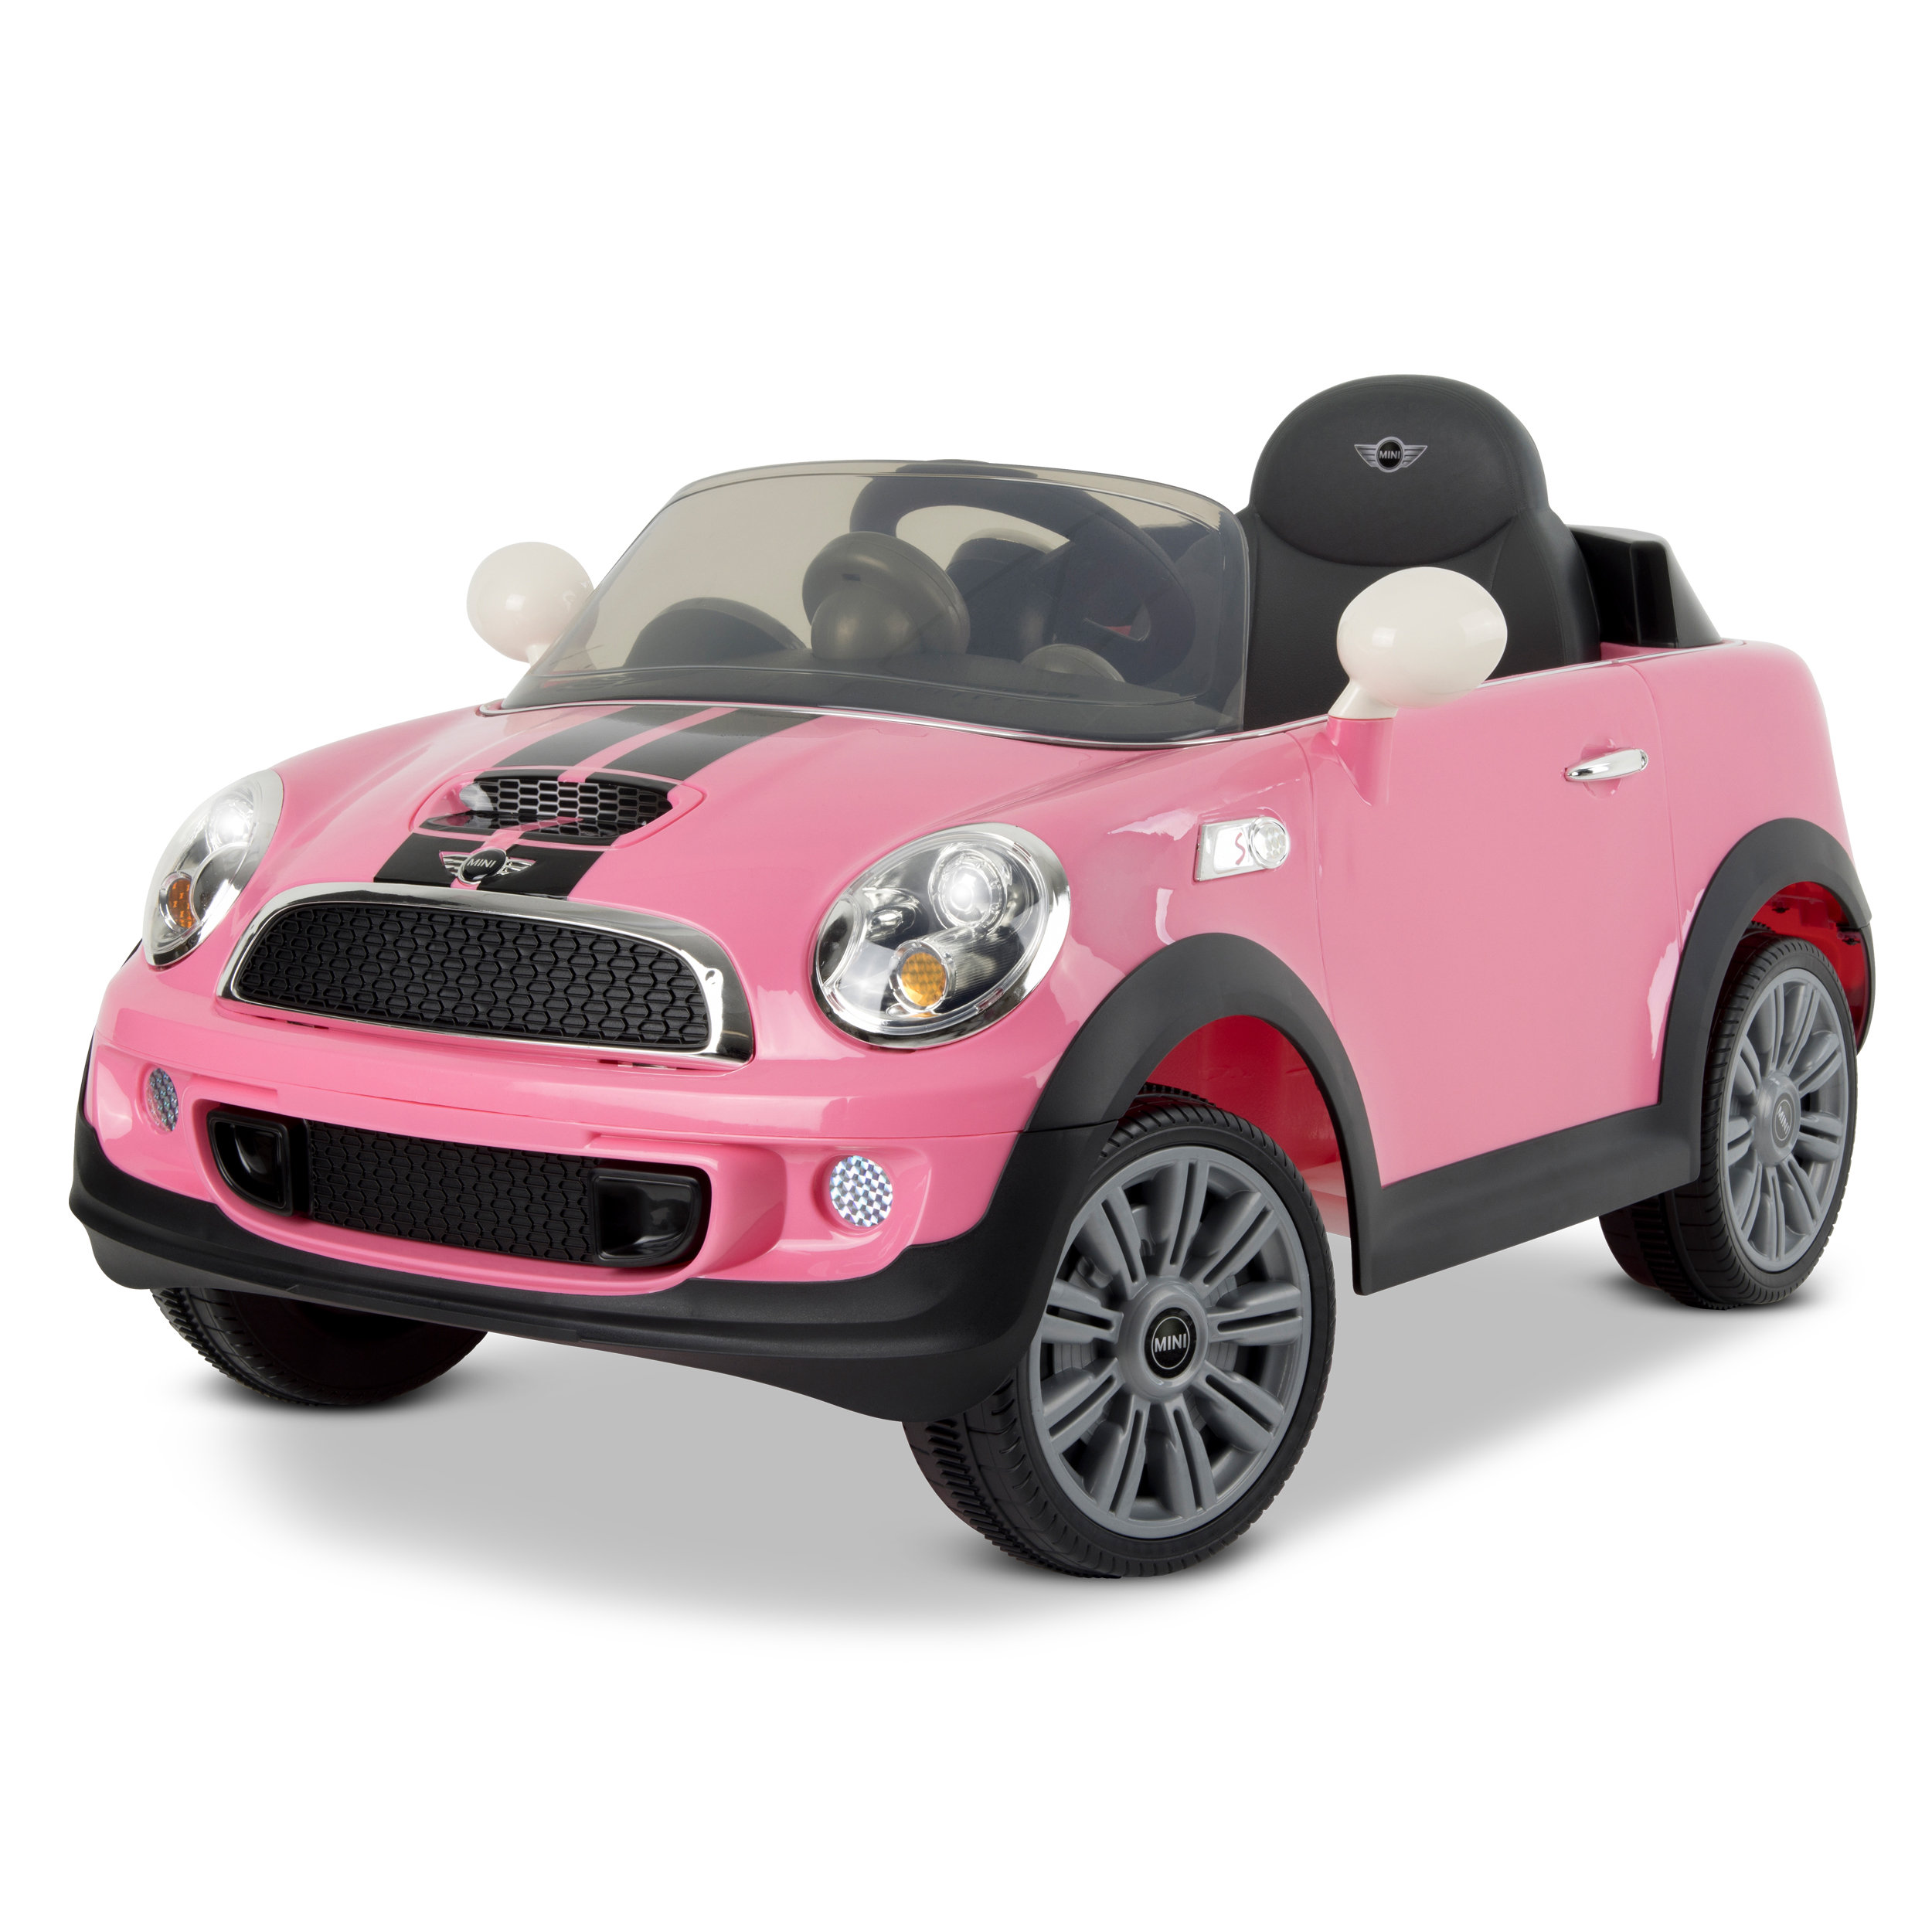 MINI Cooper S 6-Volt Battery Ride-On Vehicle (Pink)